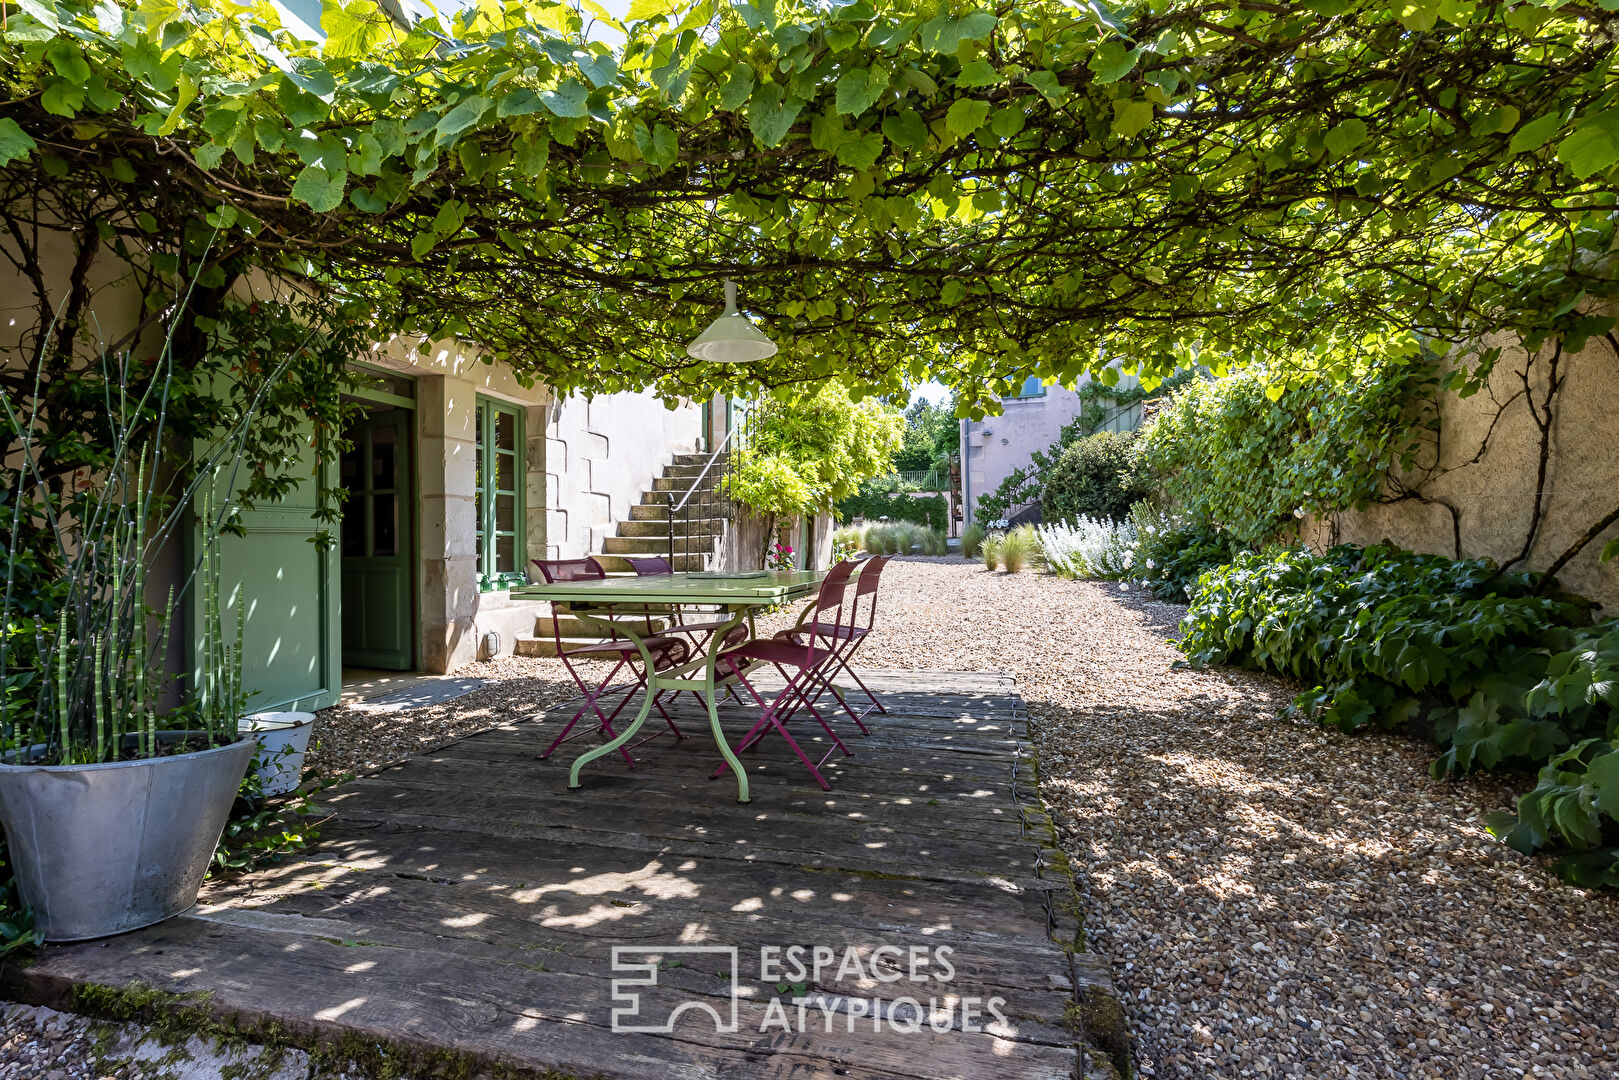 Property with its 17th century winegrower’s house